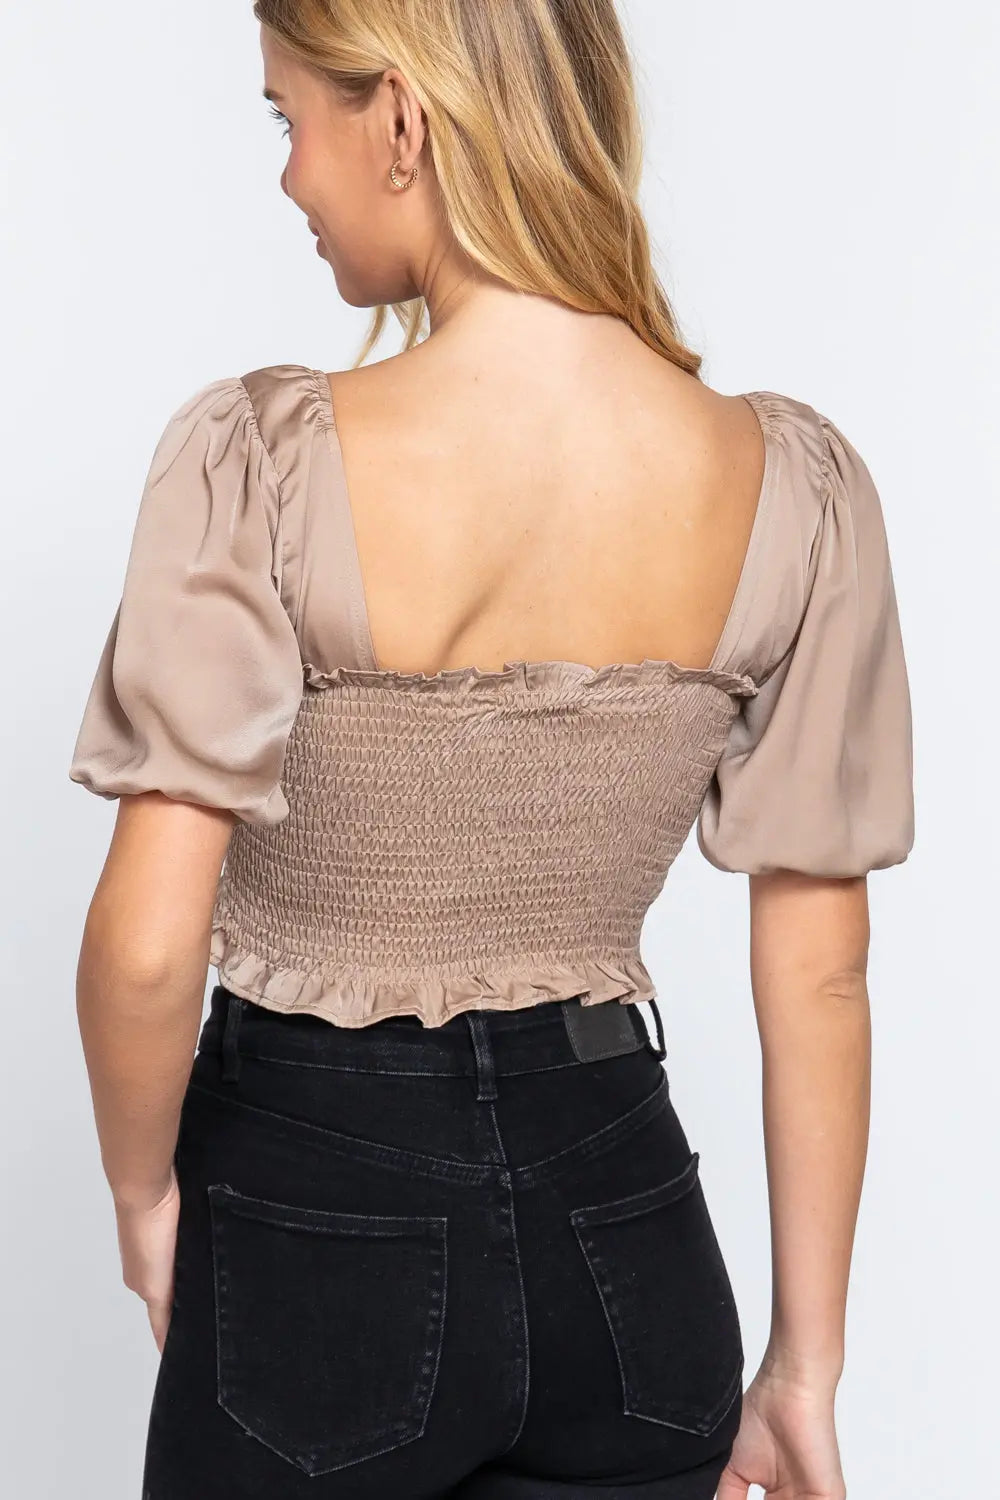 Elbow Sleeve Straight Neck Smocking W/ruffle Detail Woven Top Sunny EvE Fashion